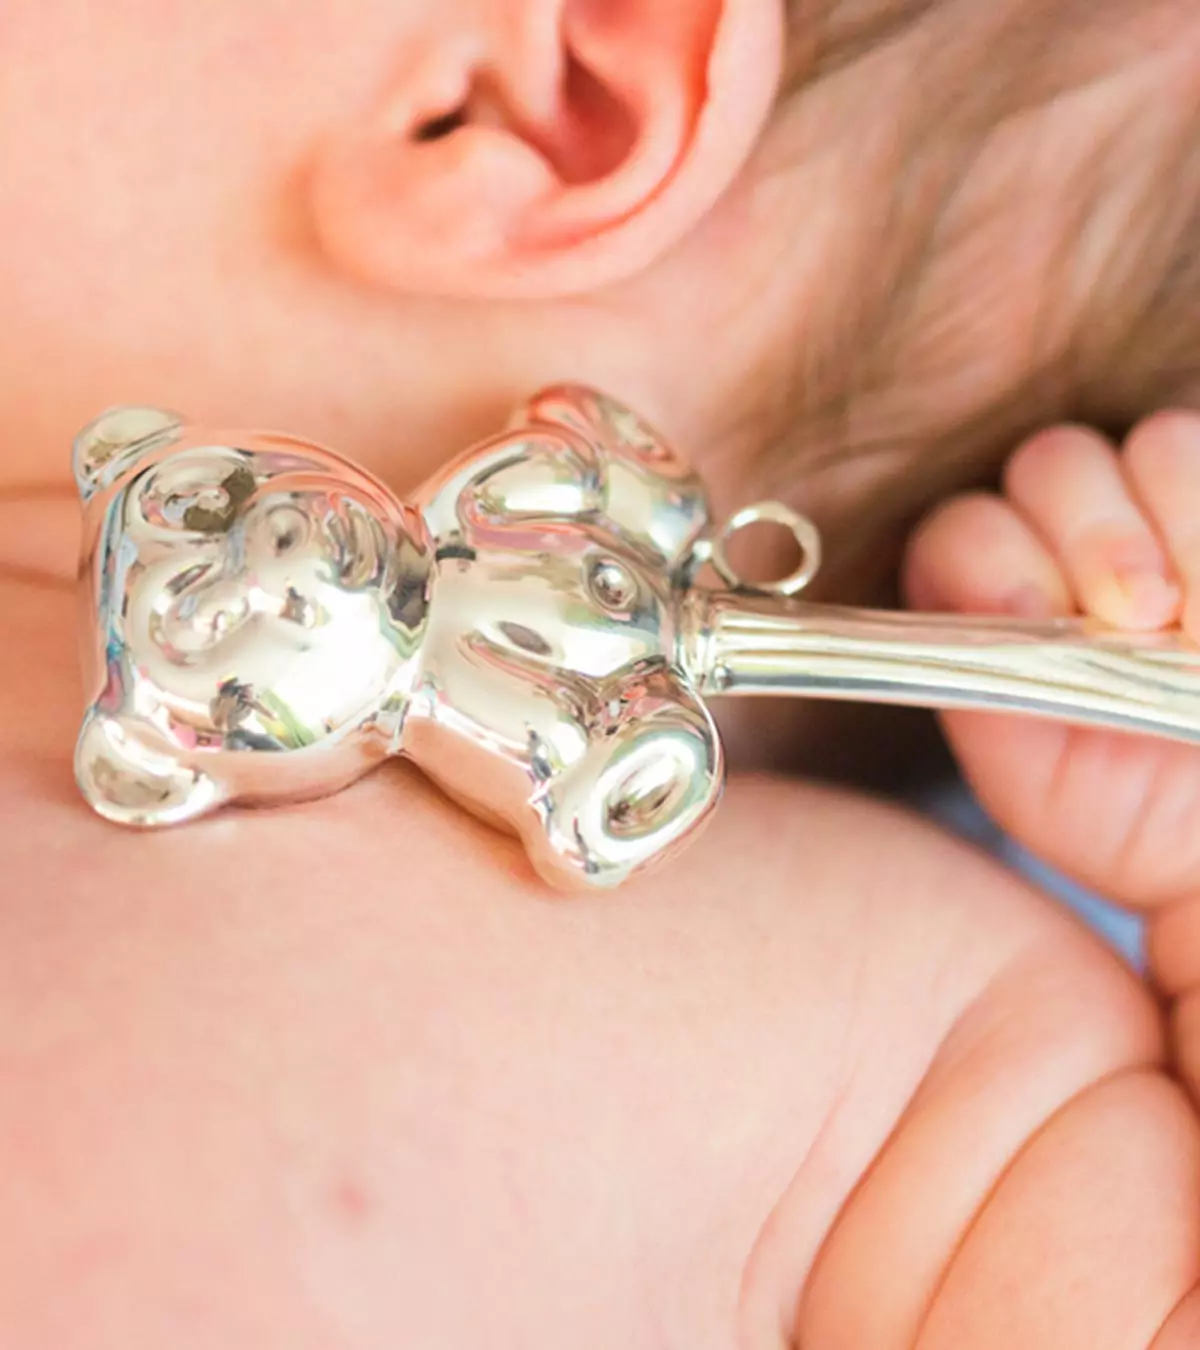 Silver Utensils For Baby Are they Safe, Benefits And Tips To Use Them